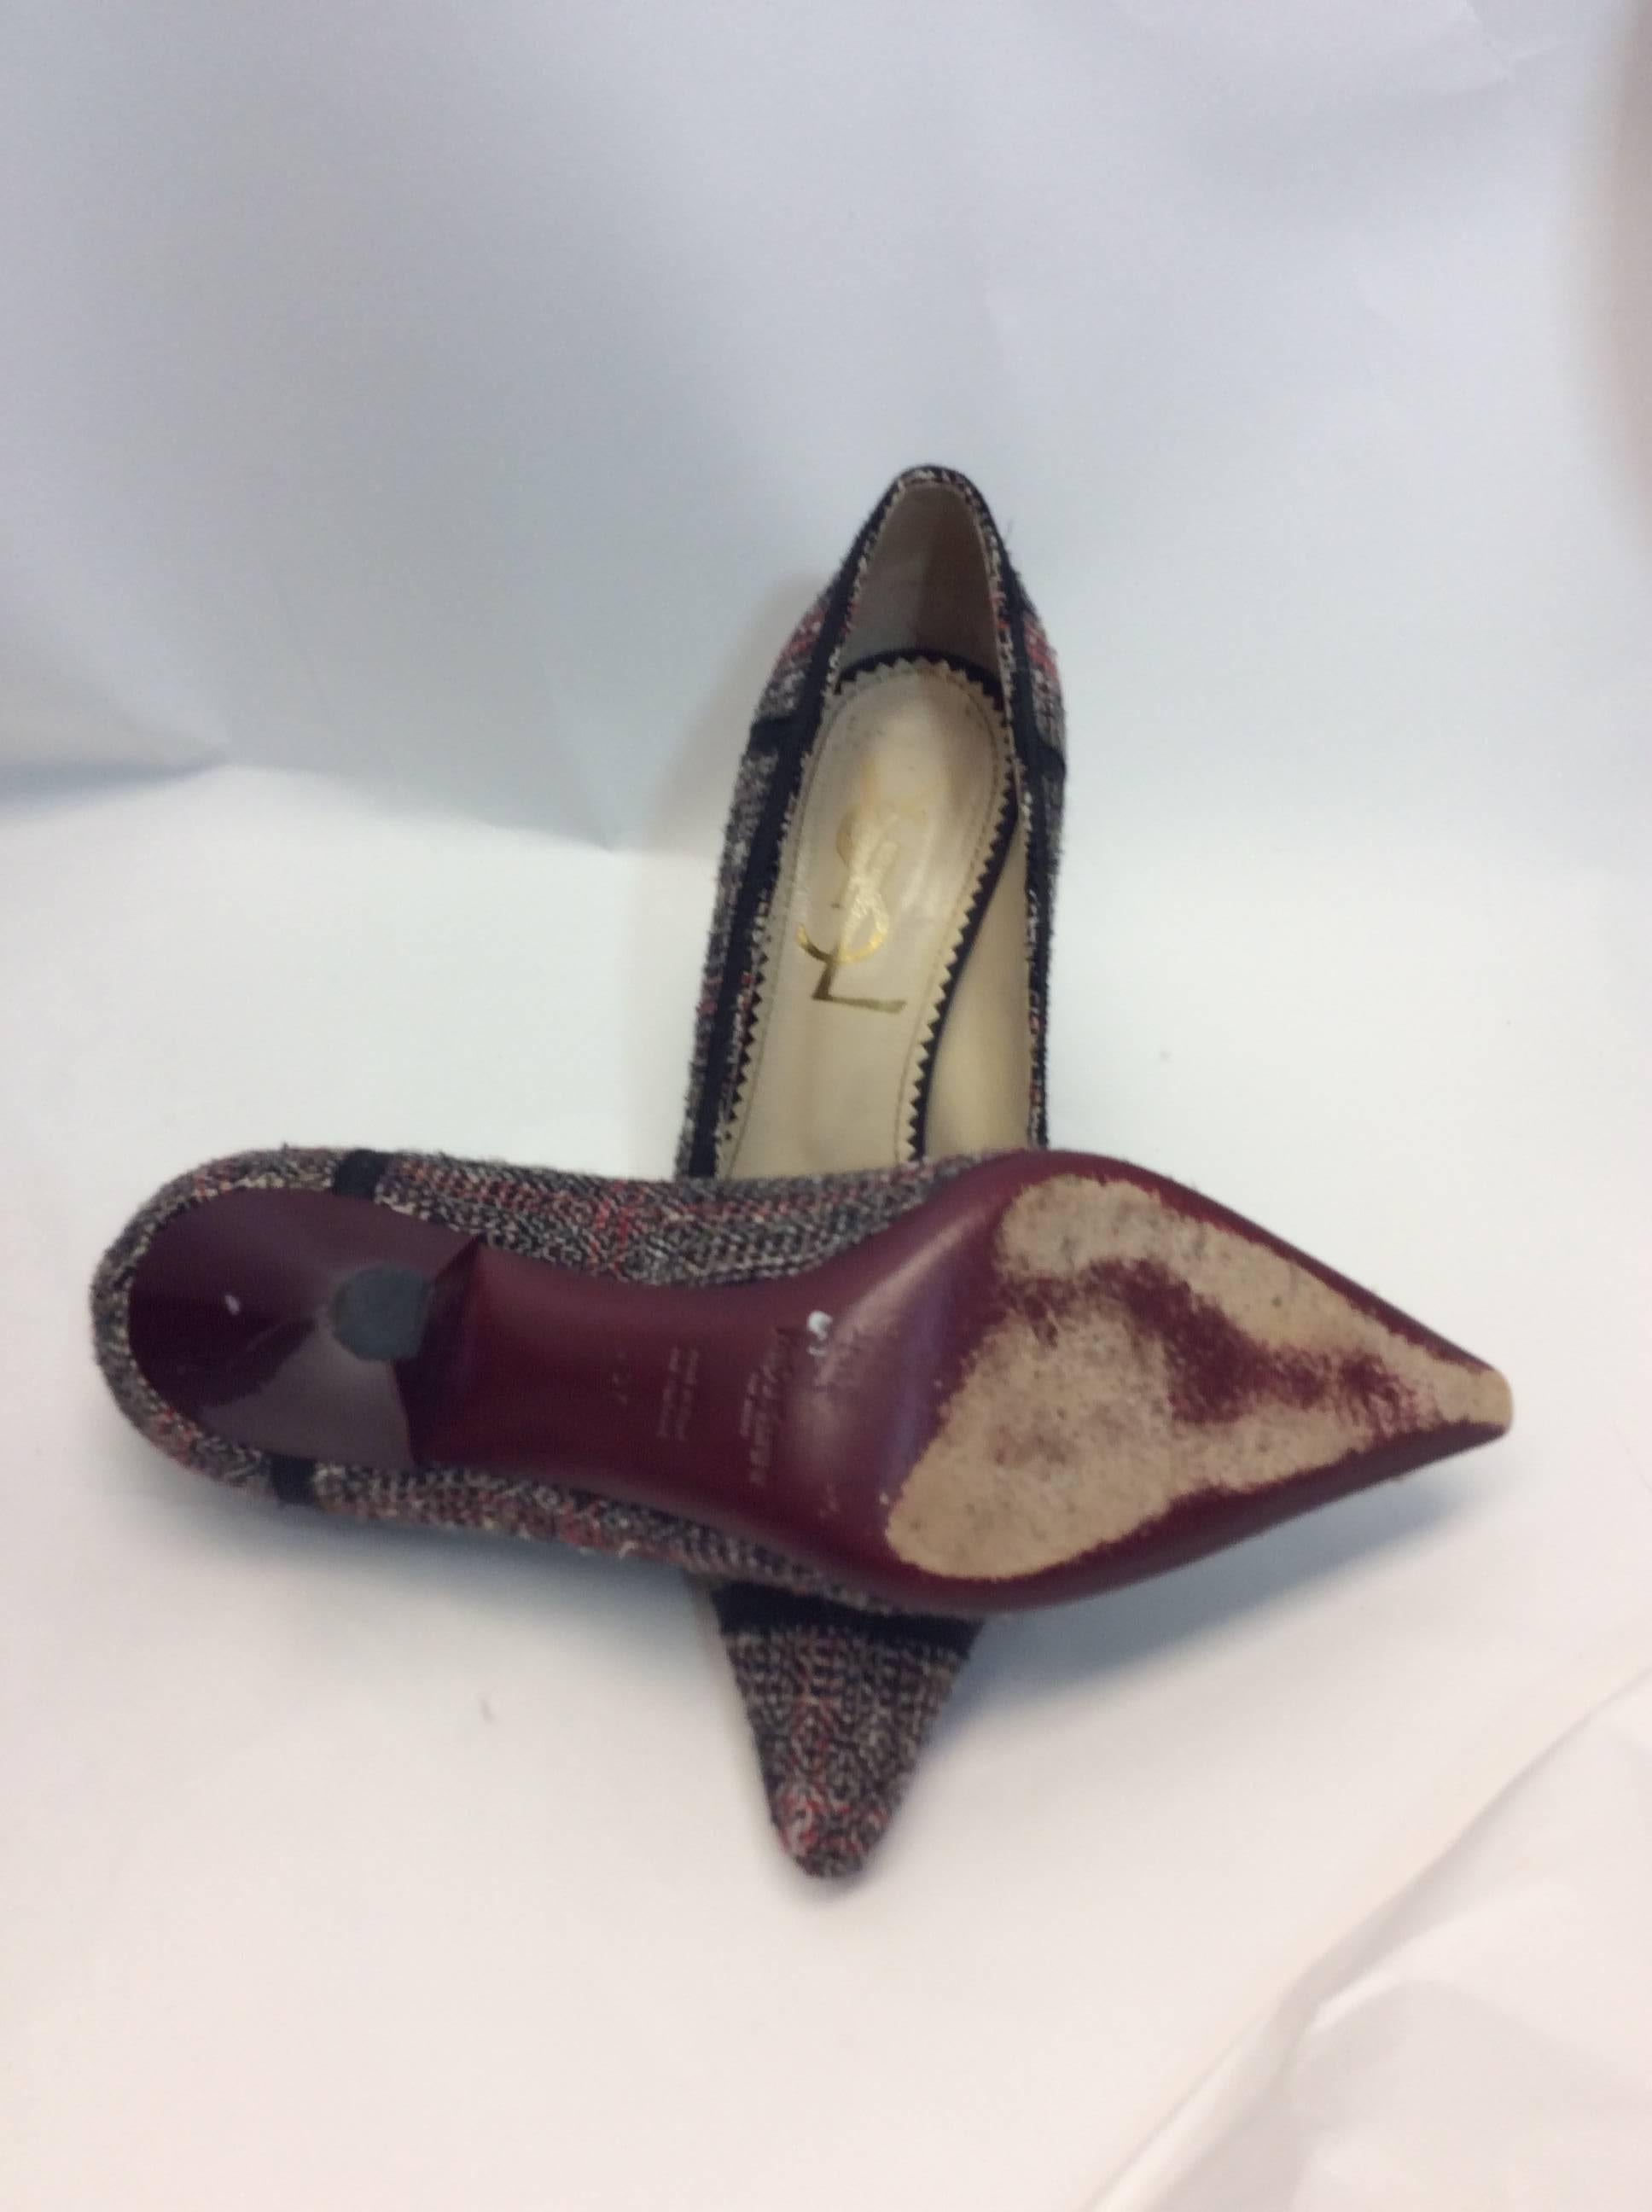 Yves Saint Laurent Red Tweed Pump In Excellent Condition For Sale In Narberth, PA